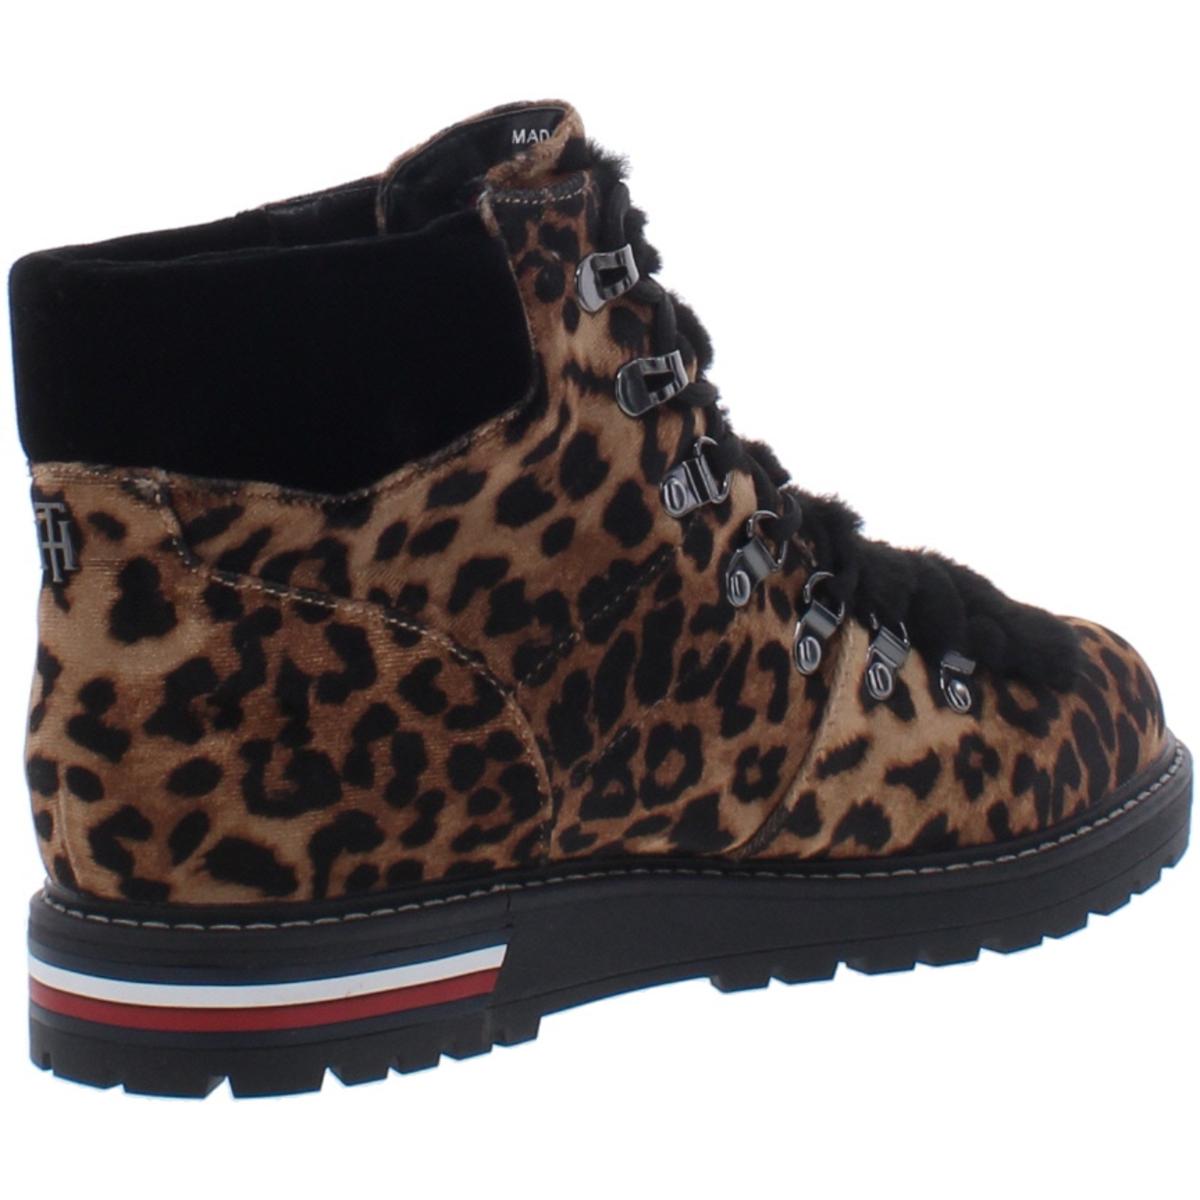 Tommy Hilfiger Womens Icee 3 Fashion Leopard Print Ankle